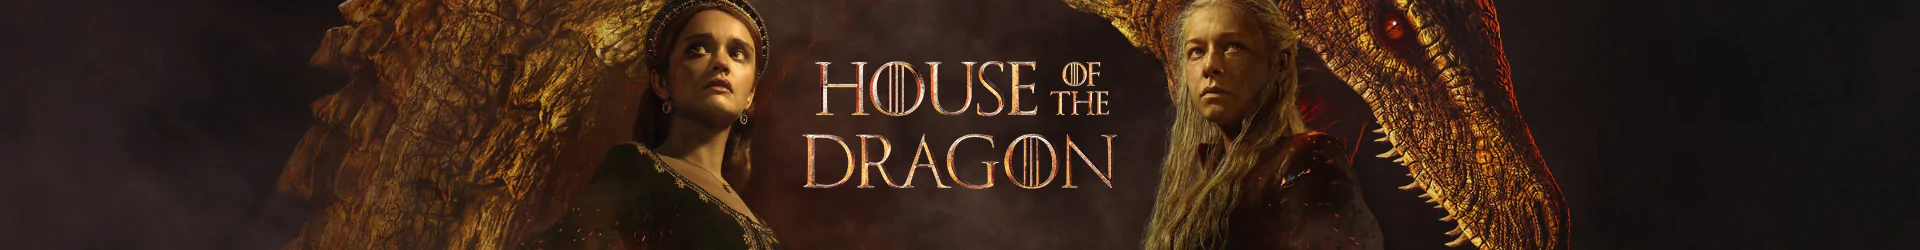 House of the Dragon products banner